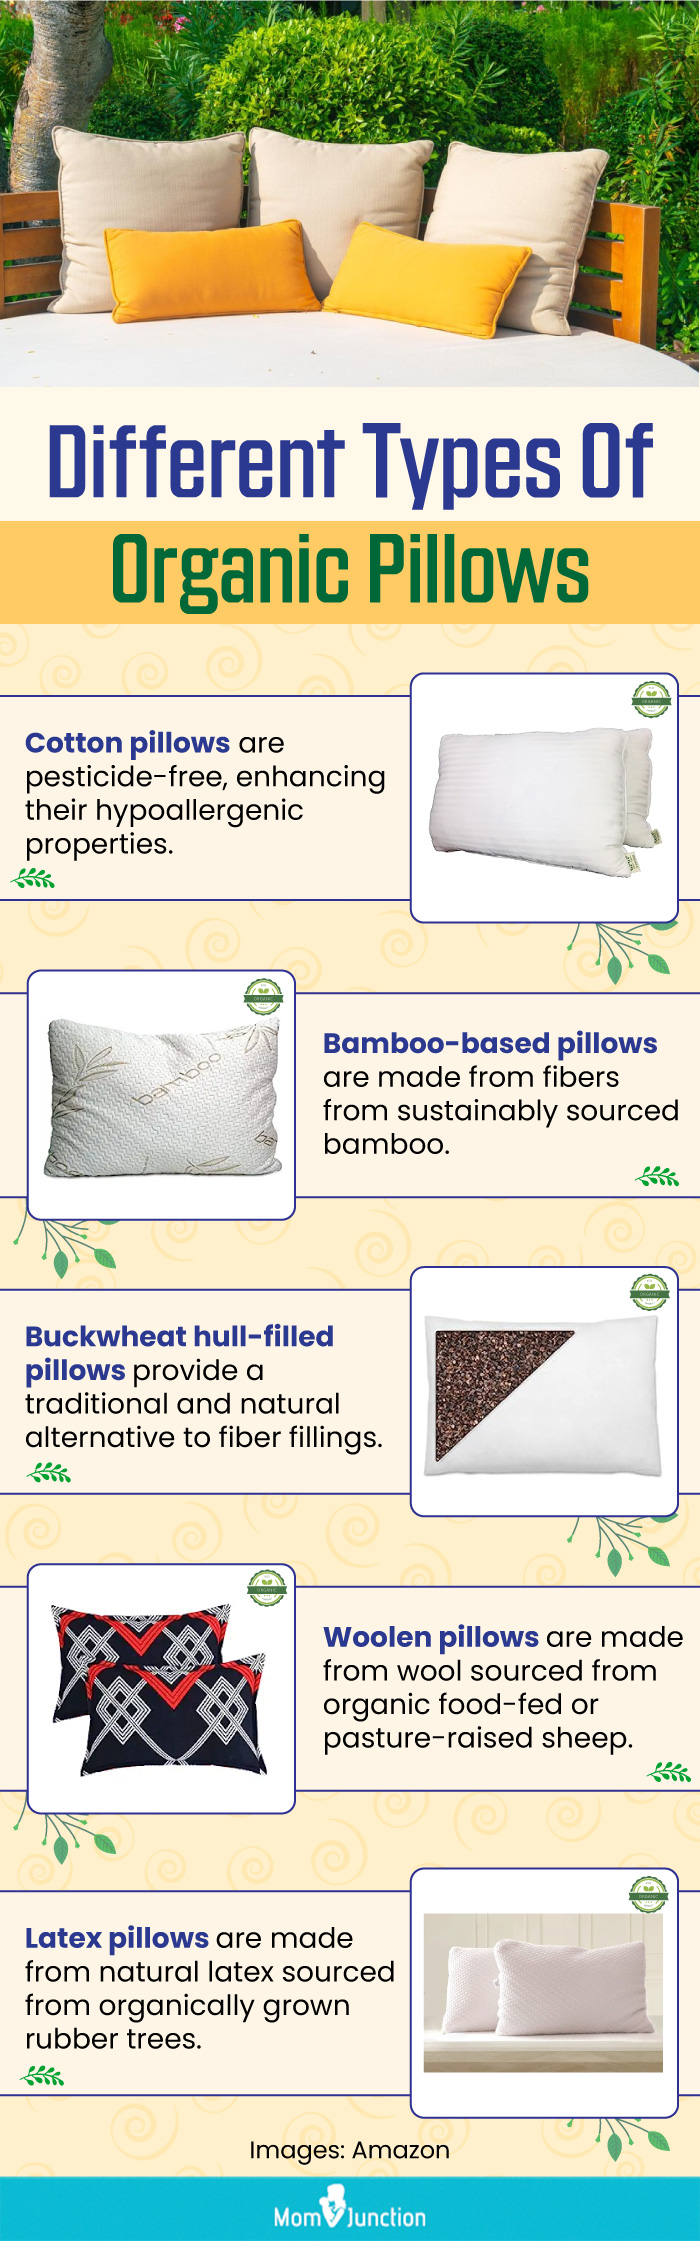 Different Types Of Organic Pillows